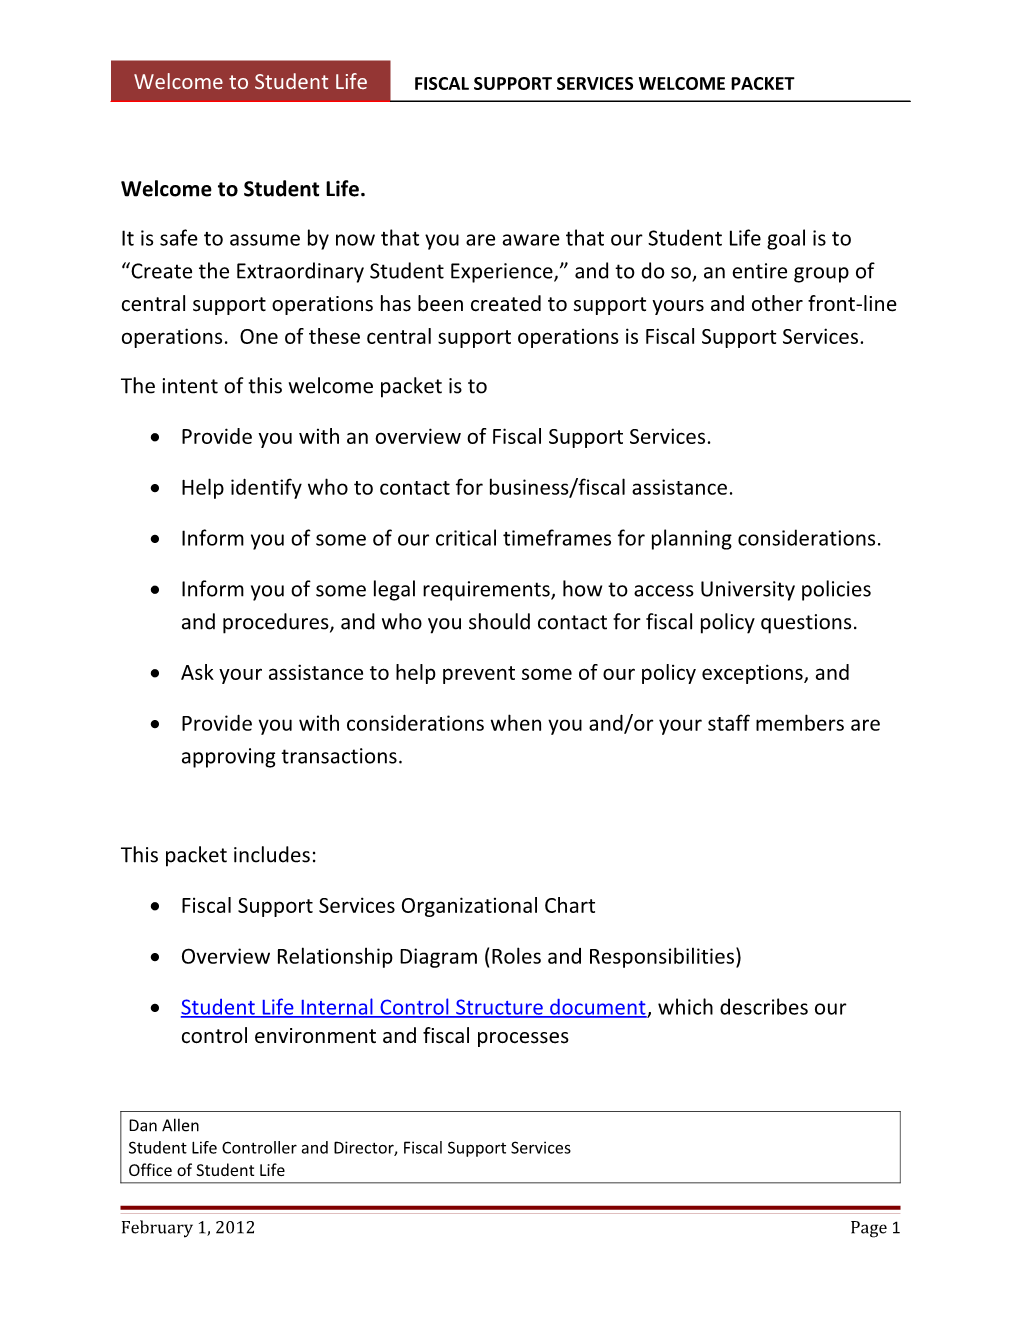 Fiscal Support Services Welcome Packet